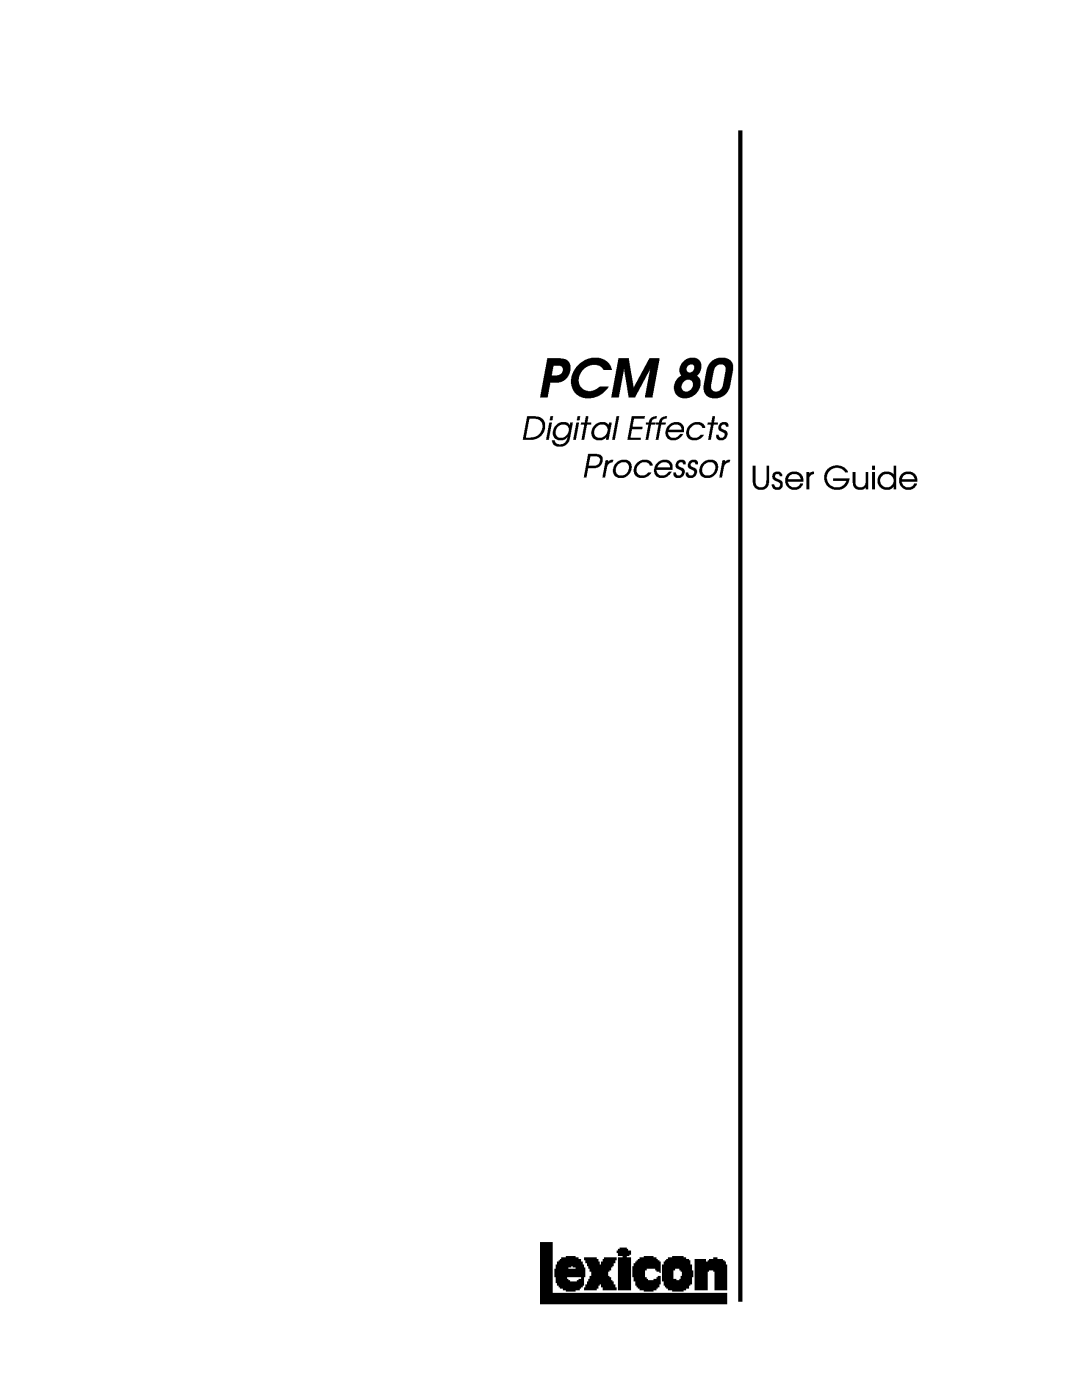 Lexicon PCM 80 manual Digital Effects Processor, User Guide 